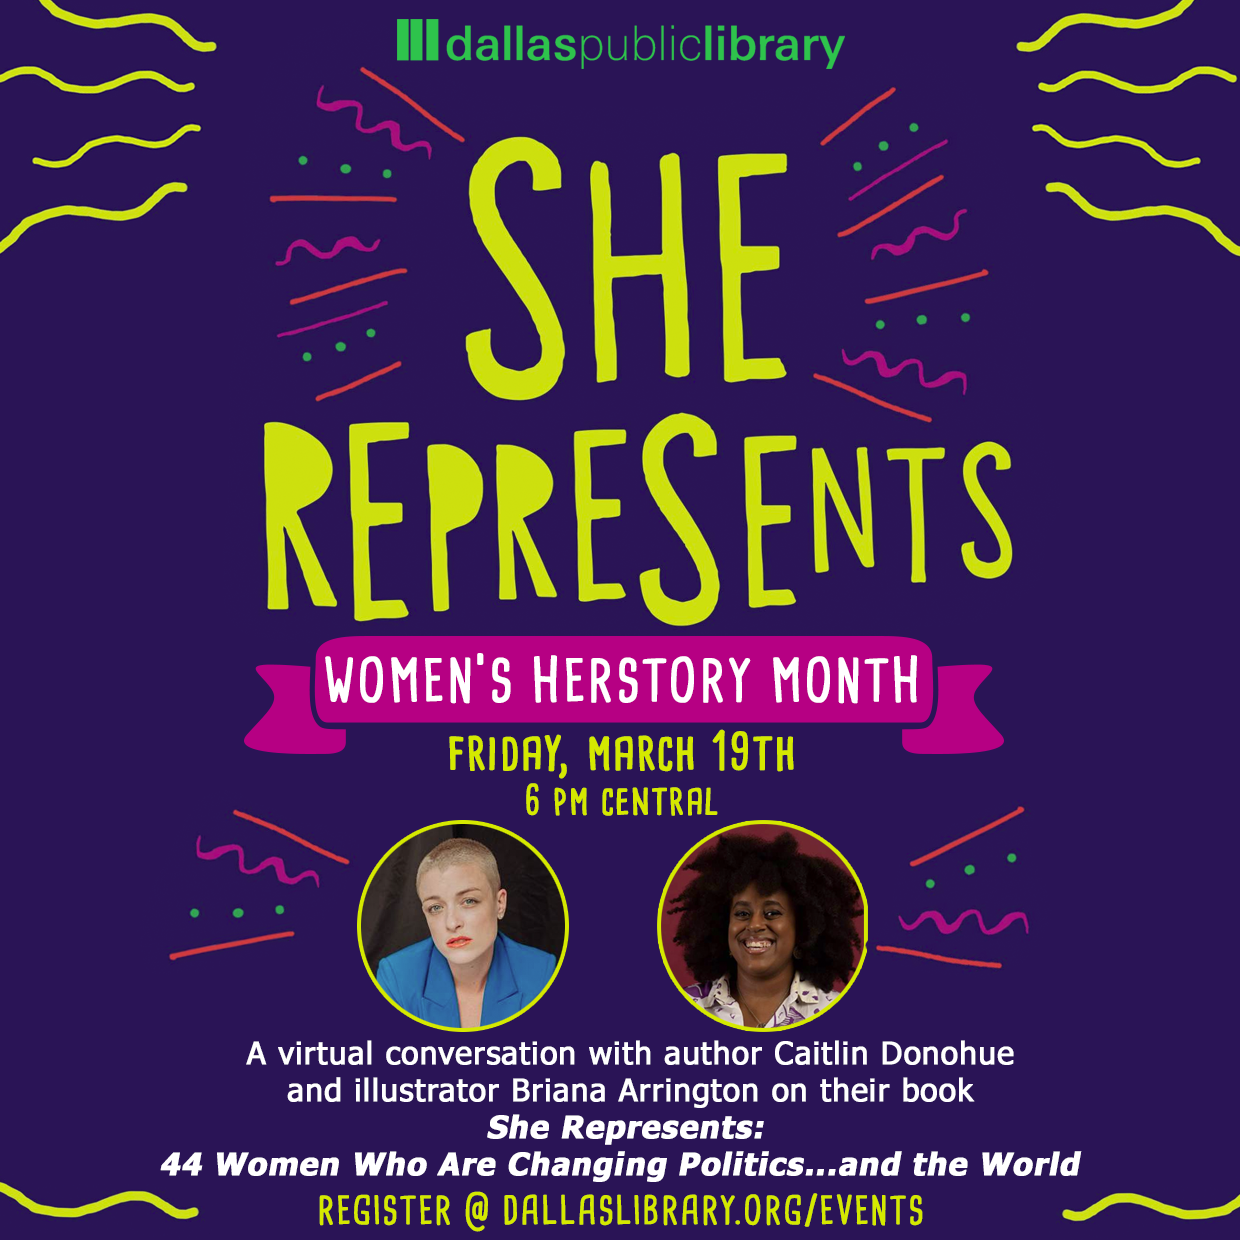 Graphic similar to the cover of the book "She Represents" with a banner that says Women's History Month. Followed by images of Author Caitlin Donahue and illustrator Briana Arington. Date March 19th at 6pm. Then says "a virtual conversation with author Caitlin Donahue and illustrator Briana Arington on their book She Represents: 44 Women Who Are Changing Politics...and the world" Register @ dallaslibrary.org/events